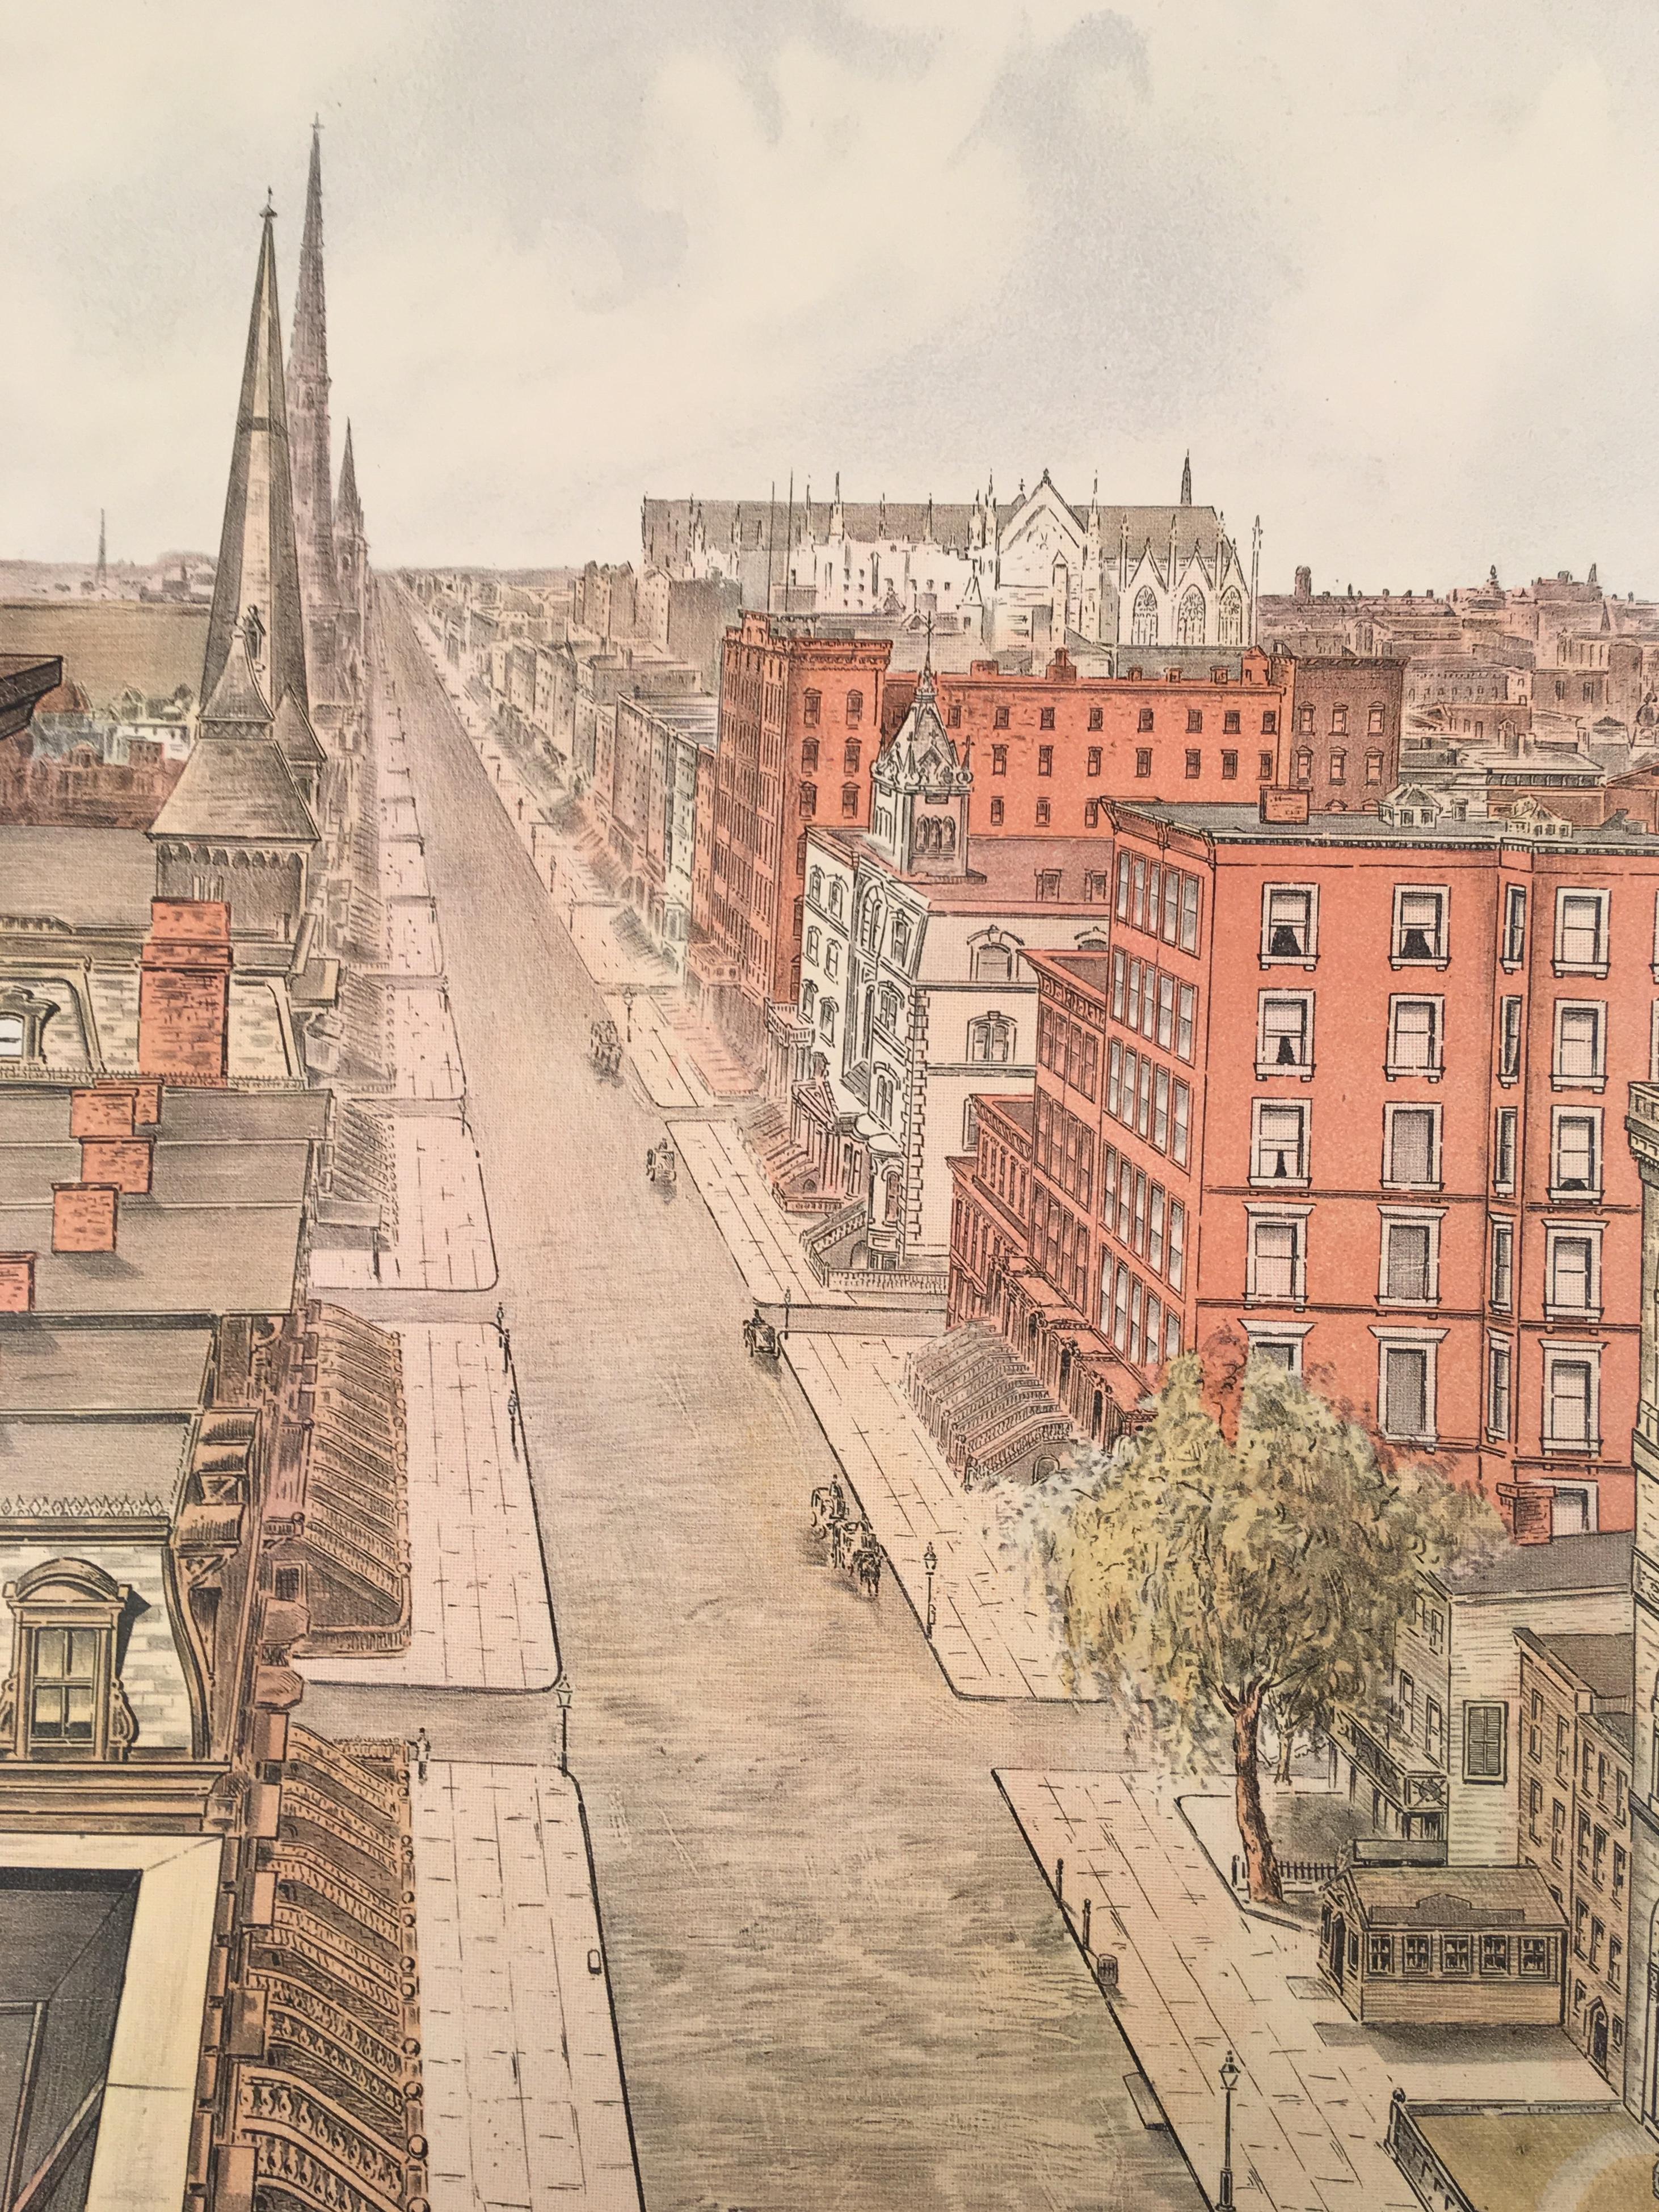 
1904 lithograph looking north from 42nd Street shows the spire of the Collegiate Church of St. Nicholas rising a few blocks away at 48th Street. It was constructed in 1872, when Fifth Avenue south of Central Park was home to many of New York’s most